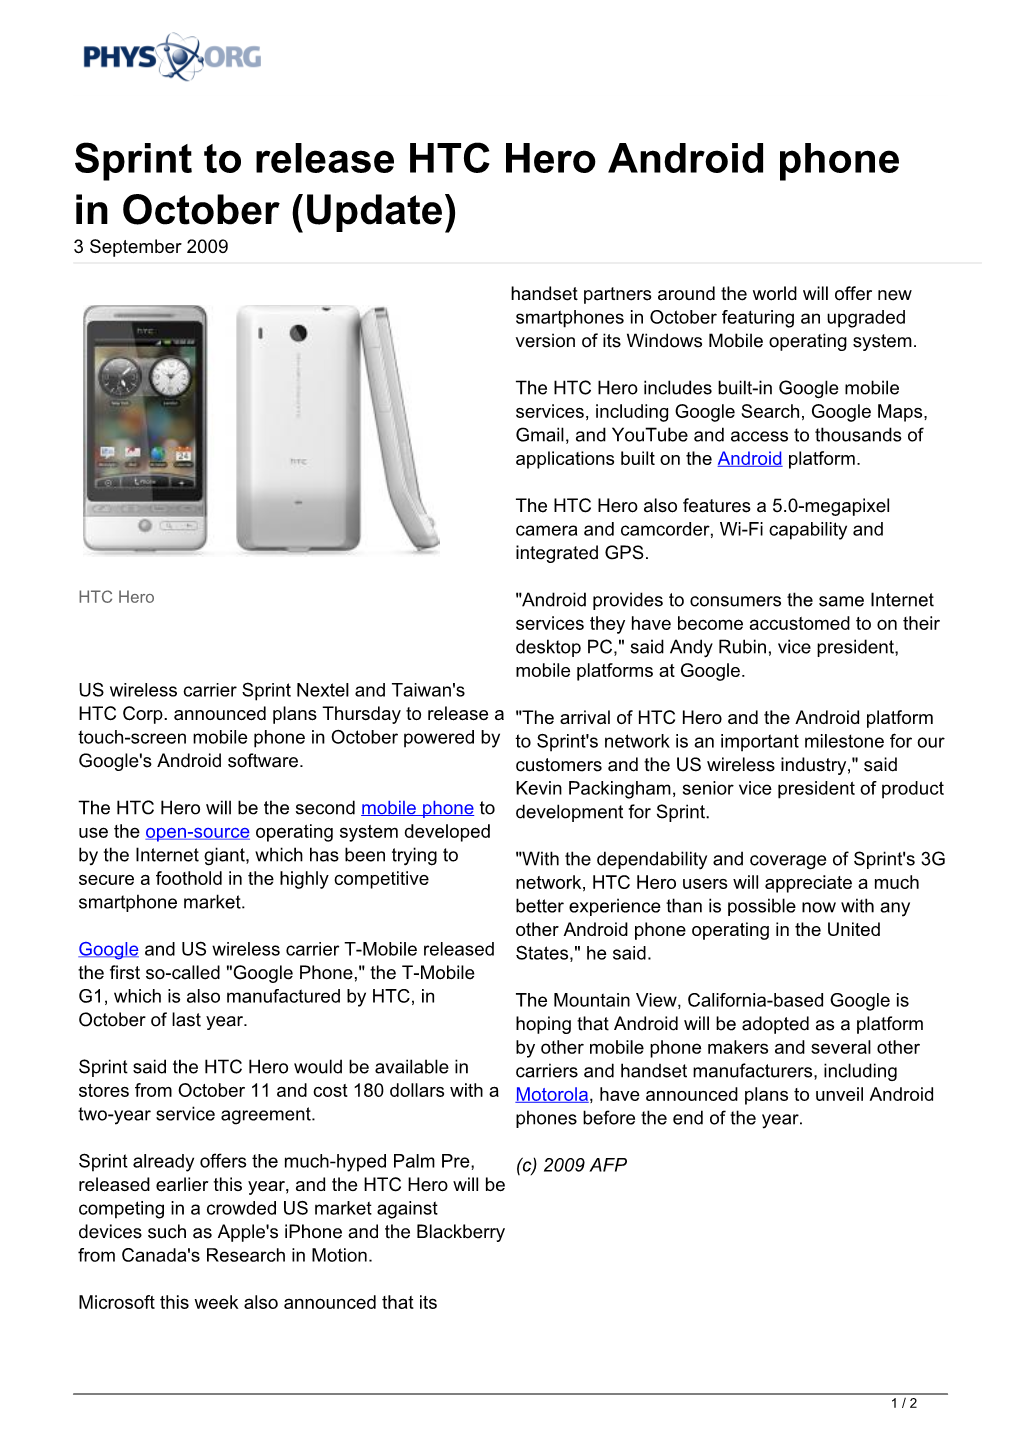 Sprint to Release HTC Hero Android Phone in October (Update) 3 September 2009